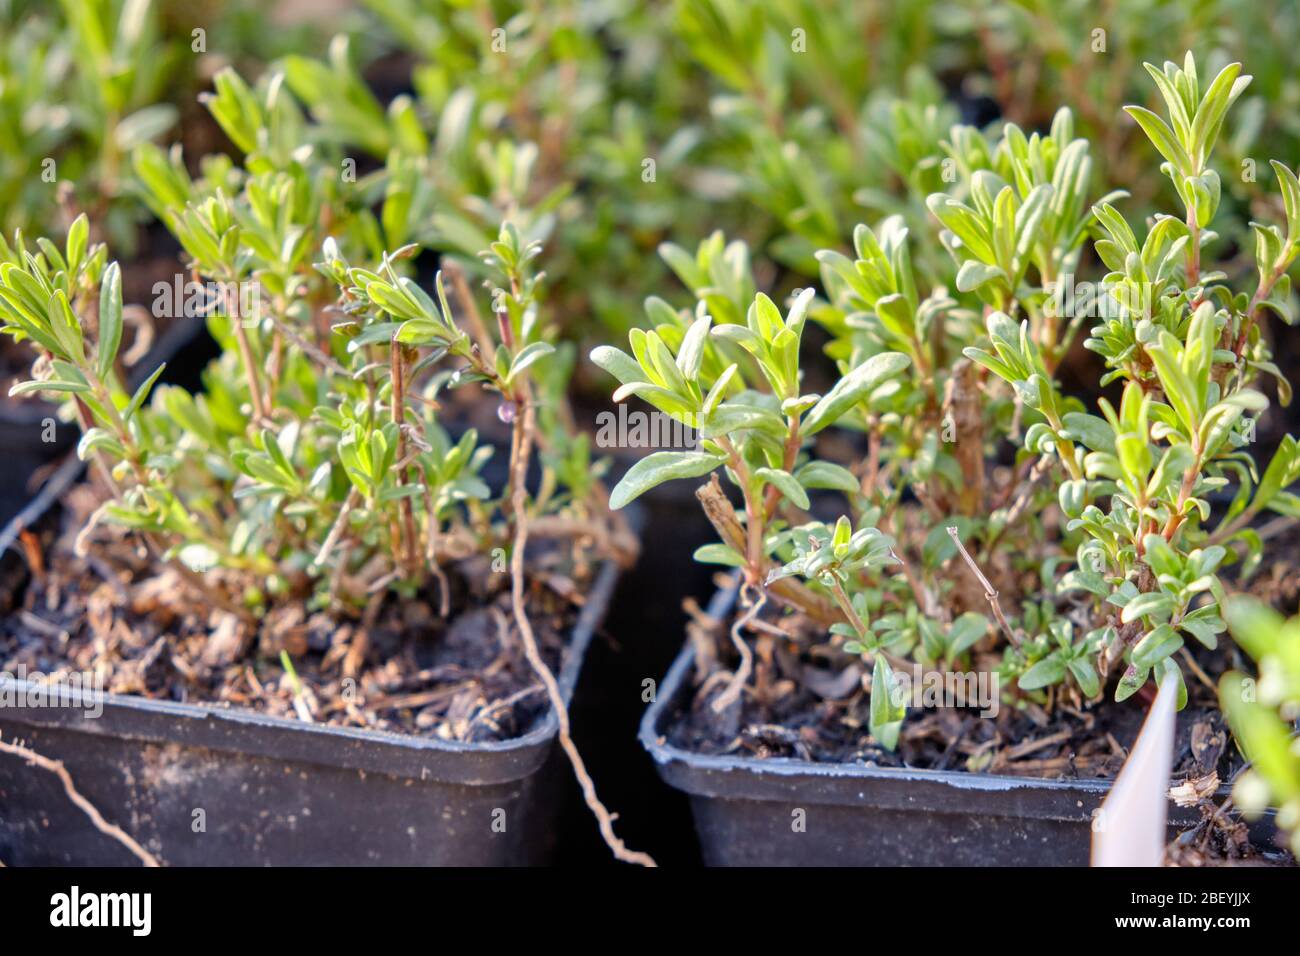 Young little hyssop plants in black plastic plant pots from the gardener ready to be planted out into the soil of a garden. Seen in Germany in April Stock Photo